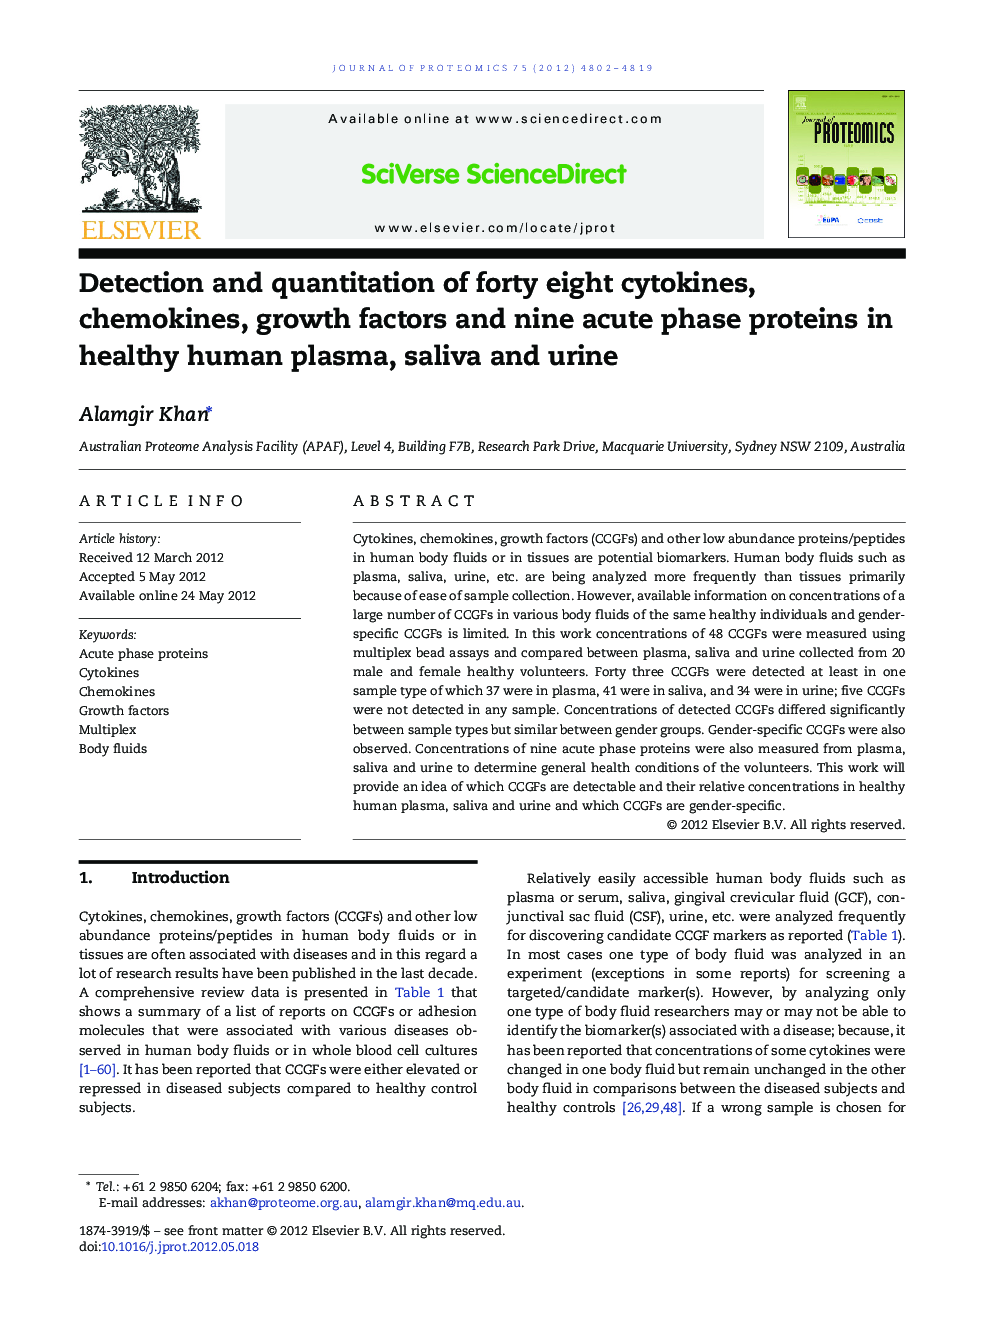 Detection and quantitation of forty eight cytokines, chemokines, growth factors and nine acute phase proteins in healthy human plasma, saliva and urine